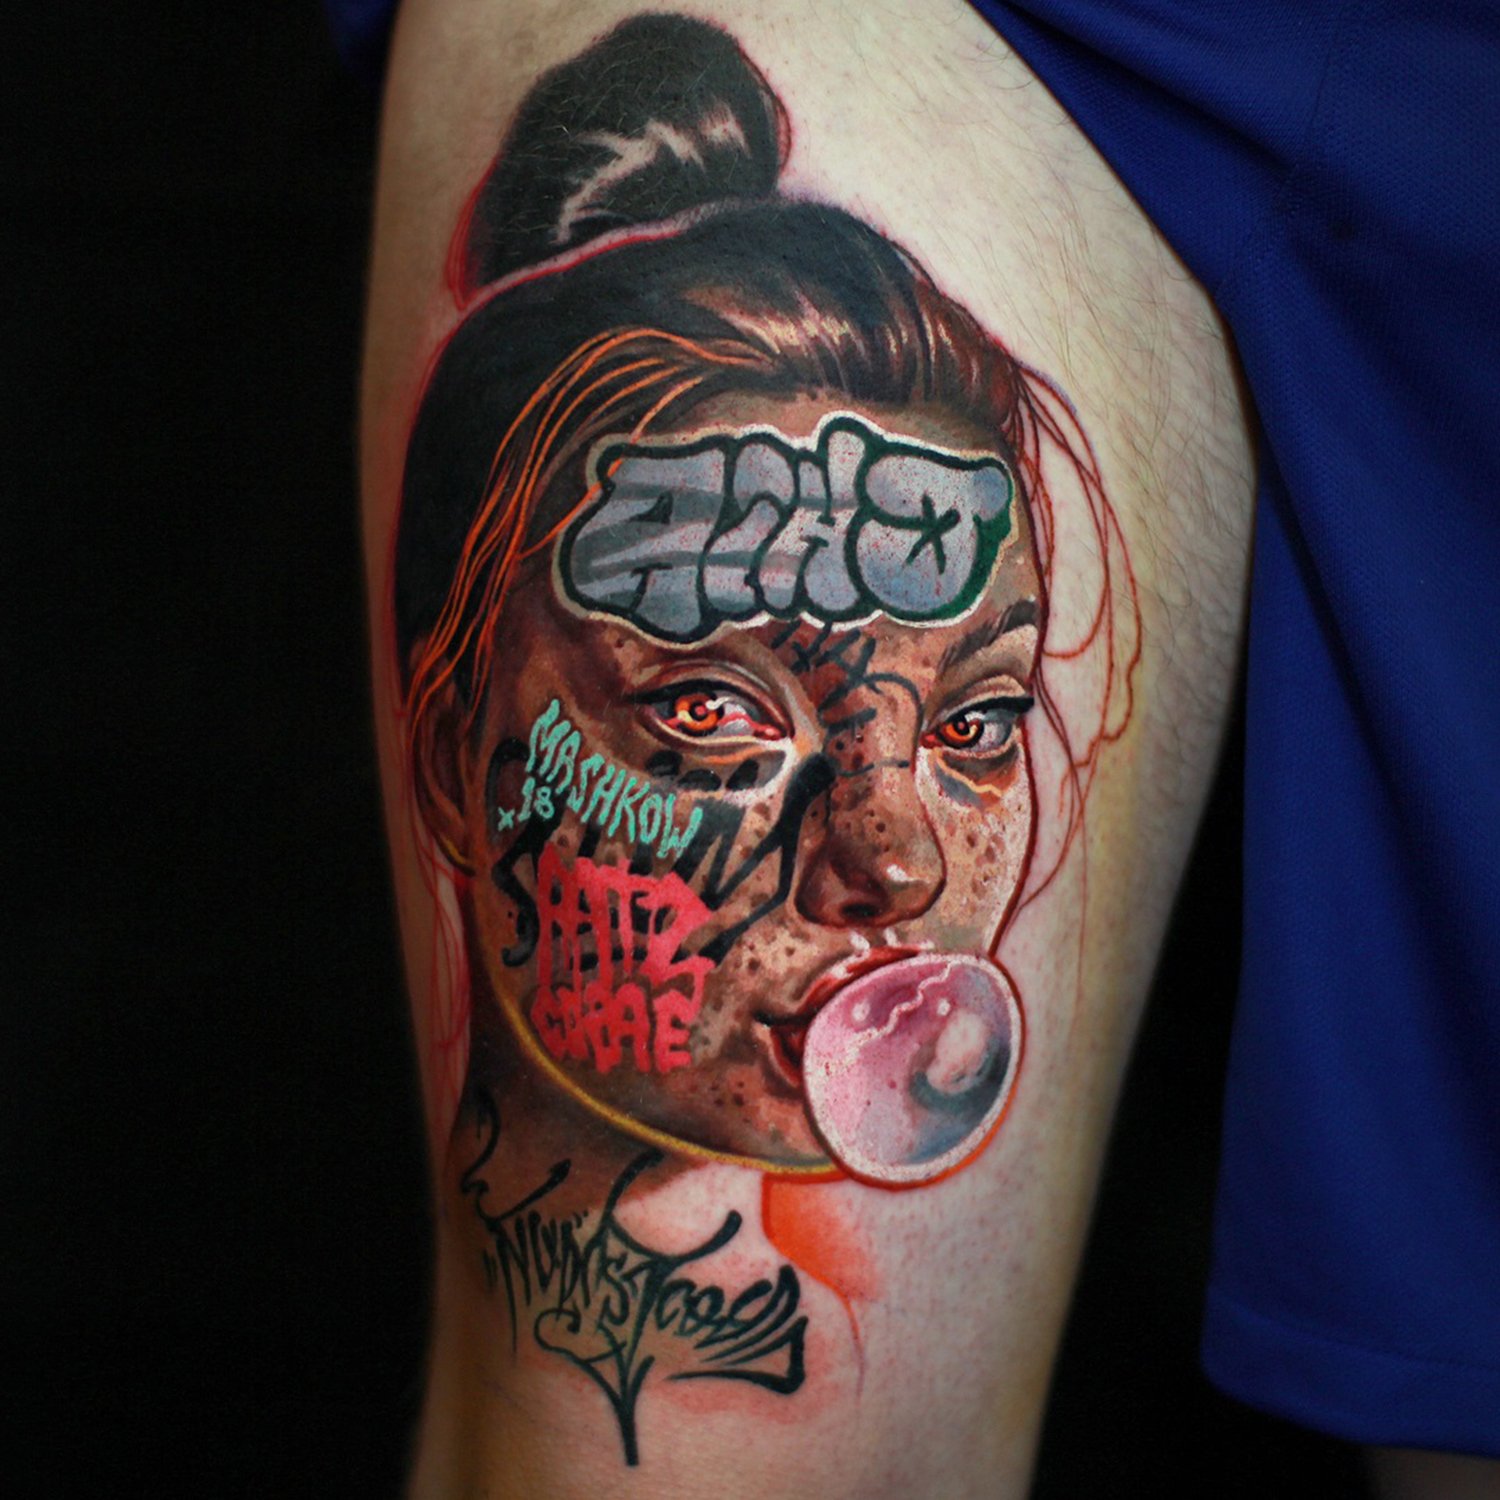 bubble gum girl, graffitied face , tattoo on thigh